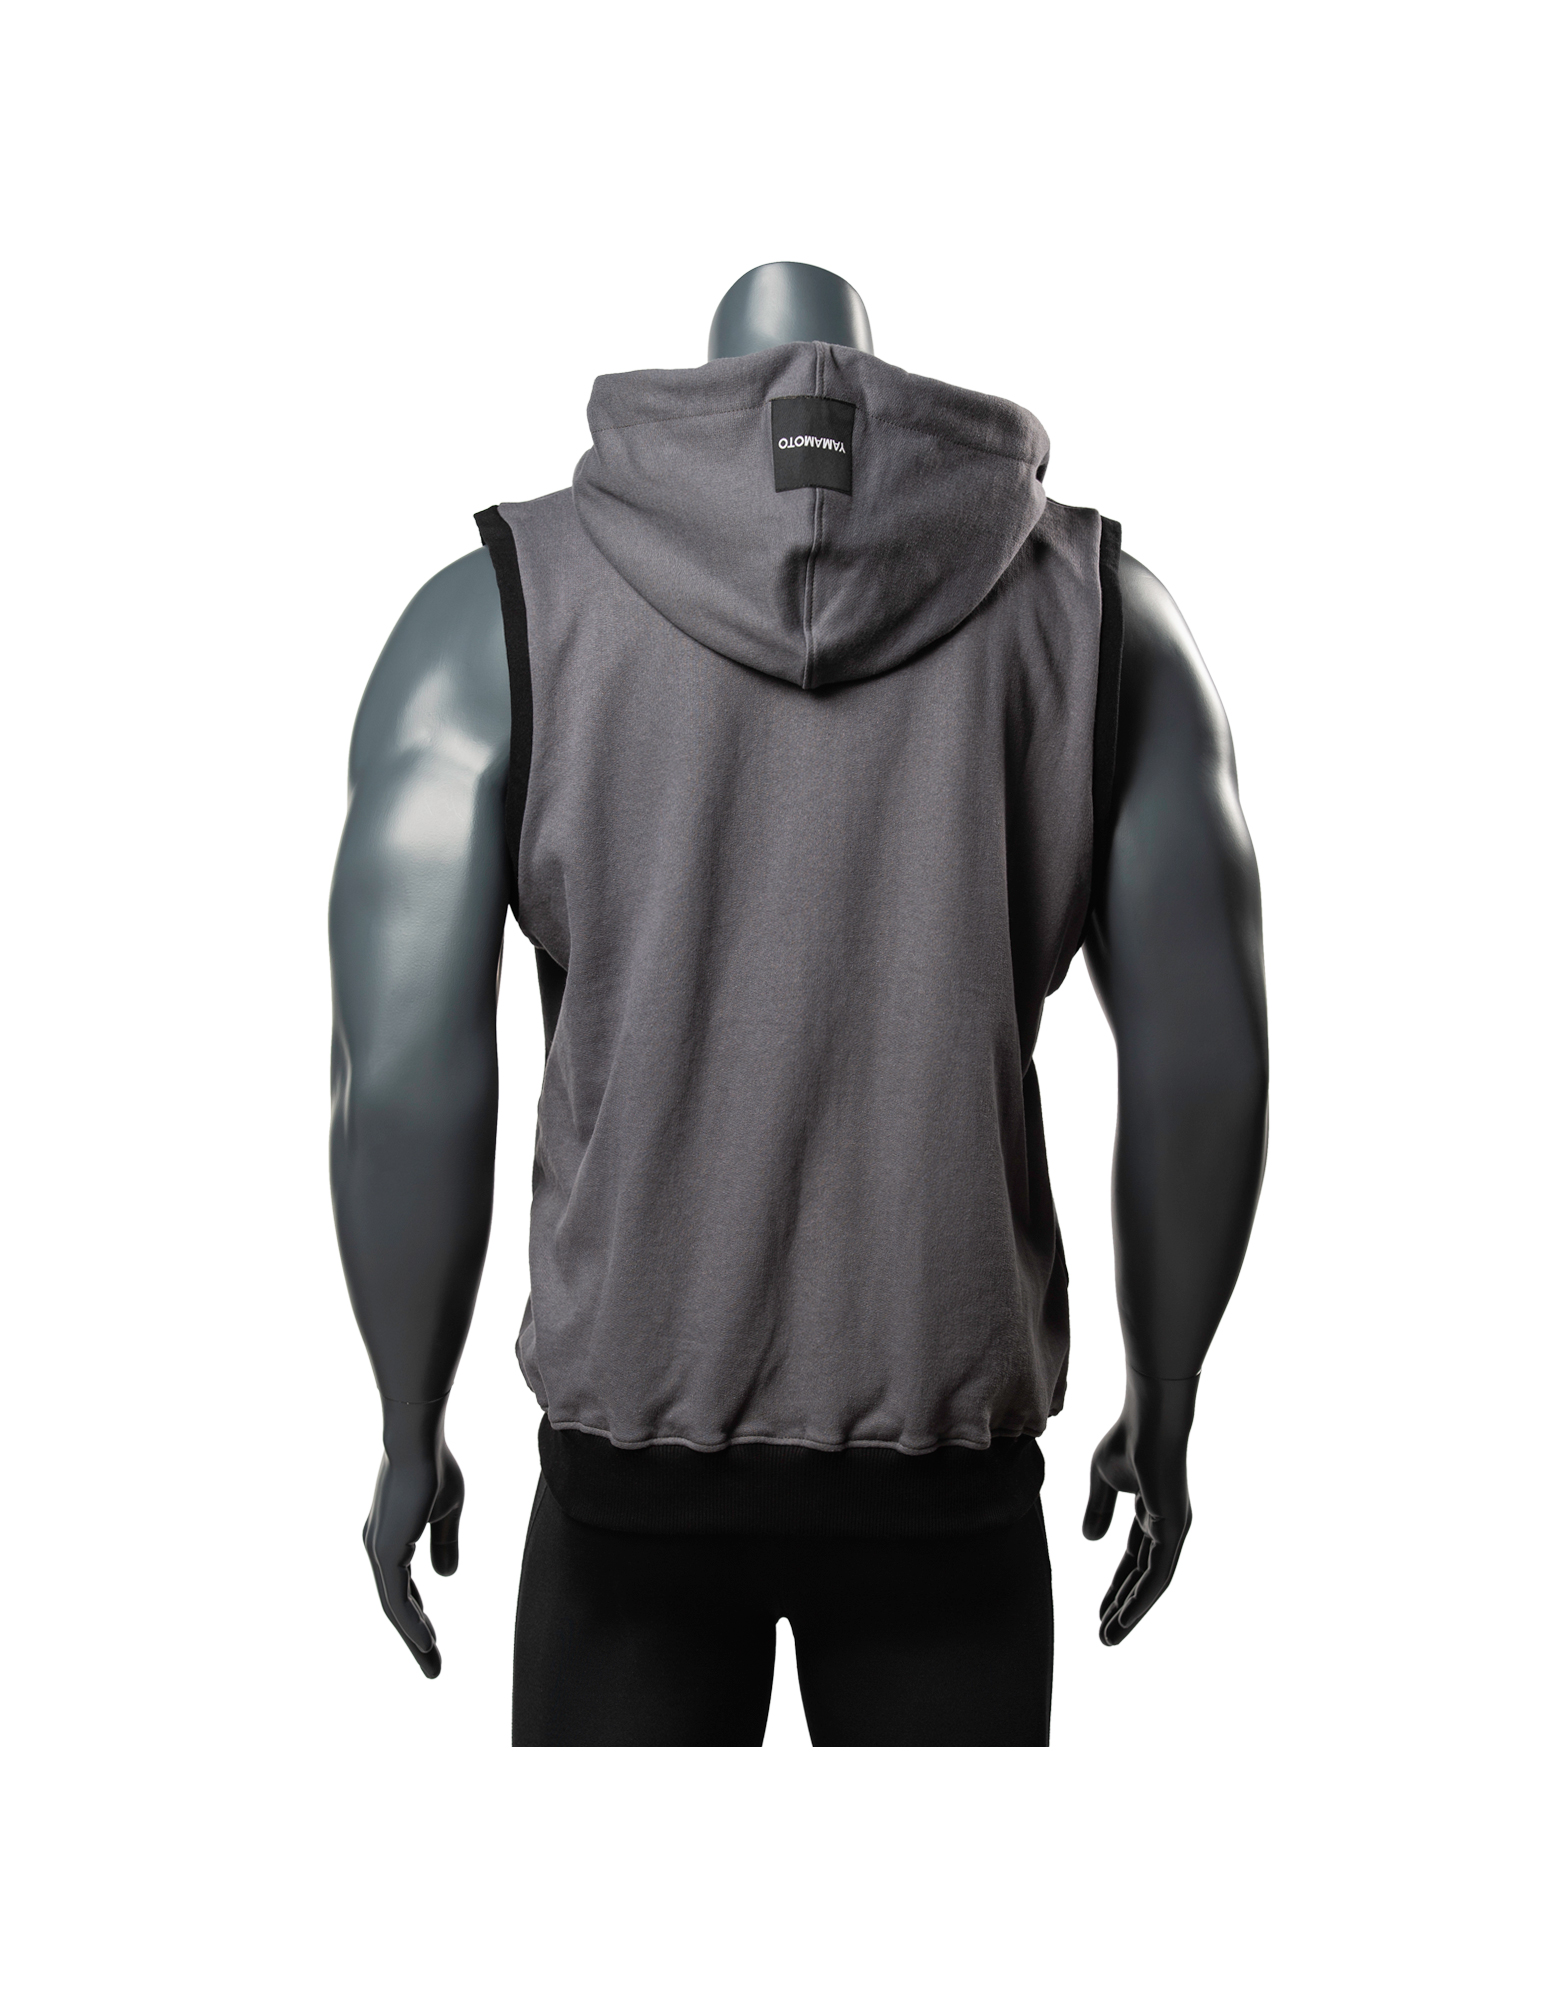 Street Hoodie Half Sleeveless by YAMAMOTO OUTFIT (colour: grey)